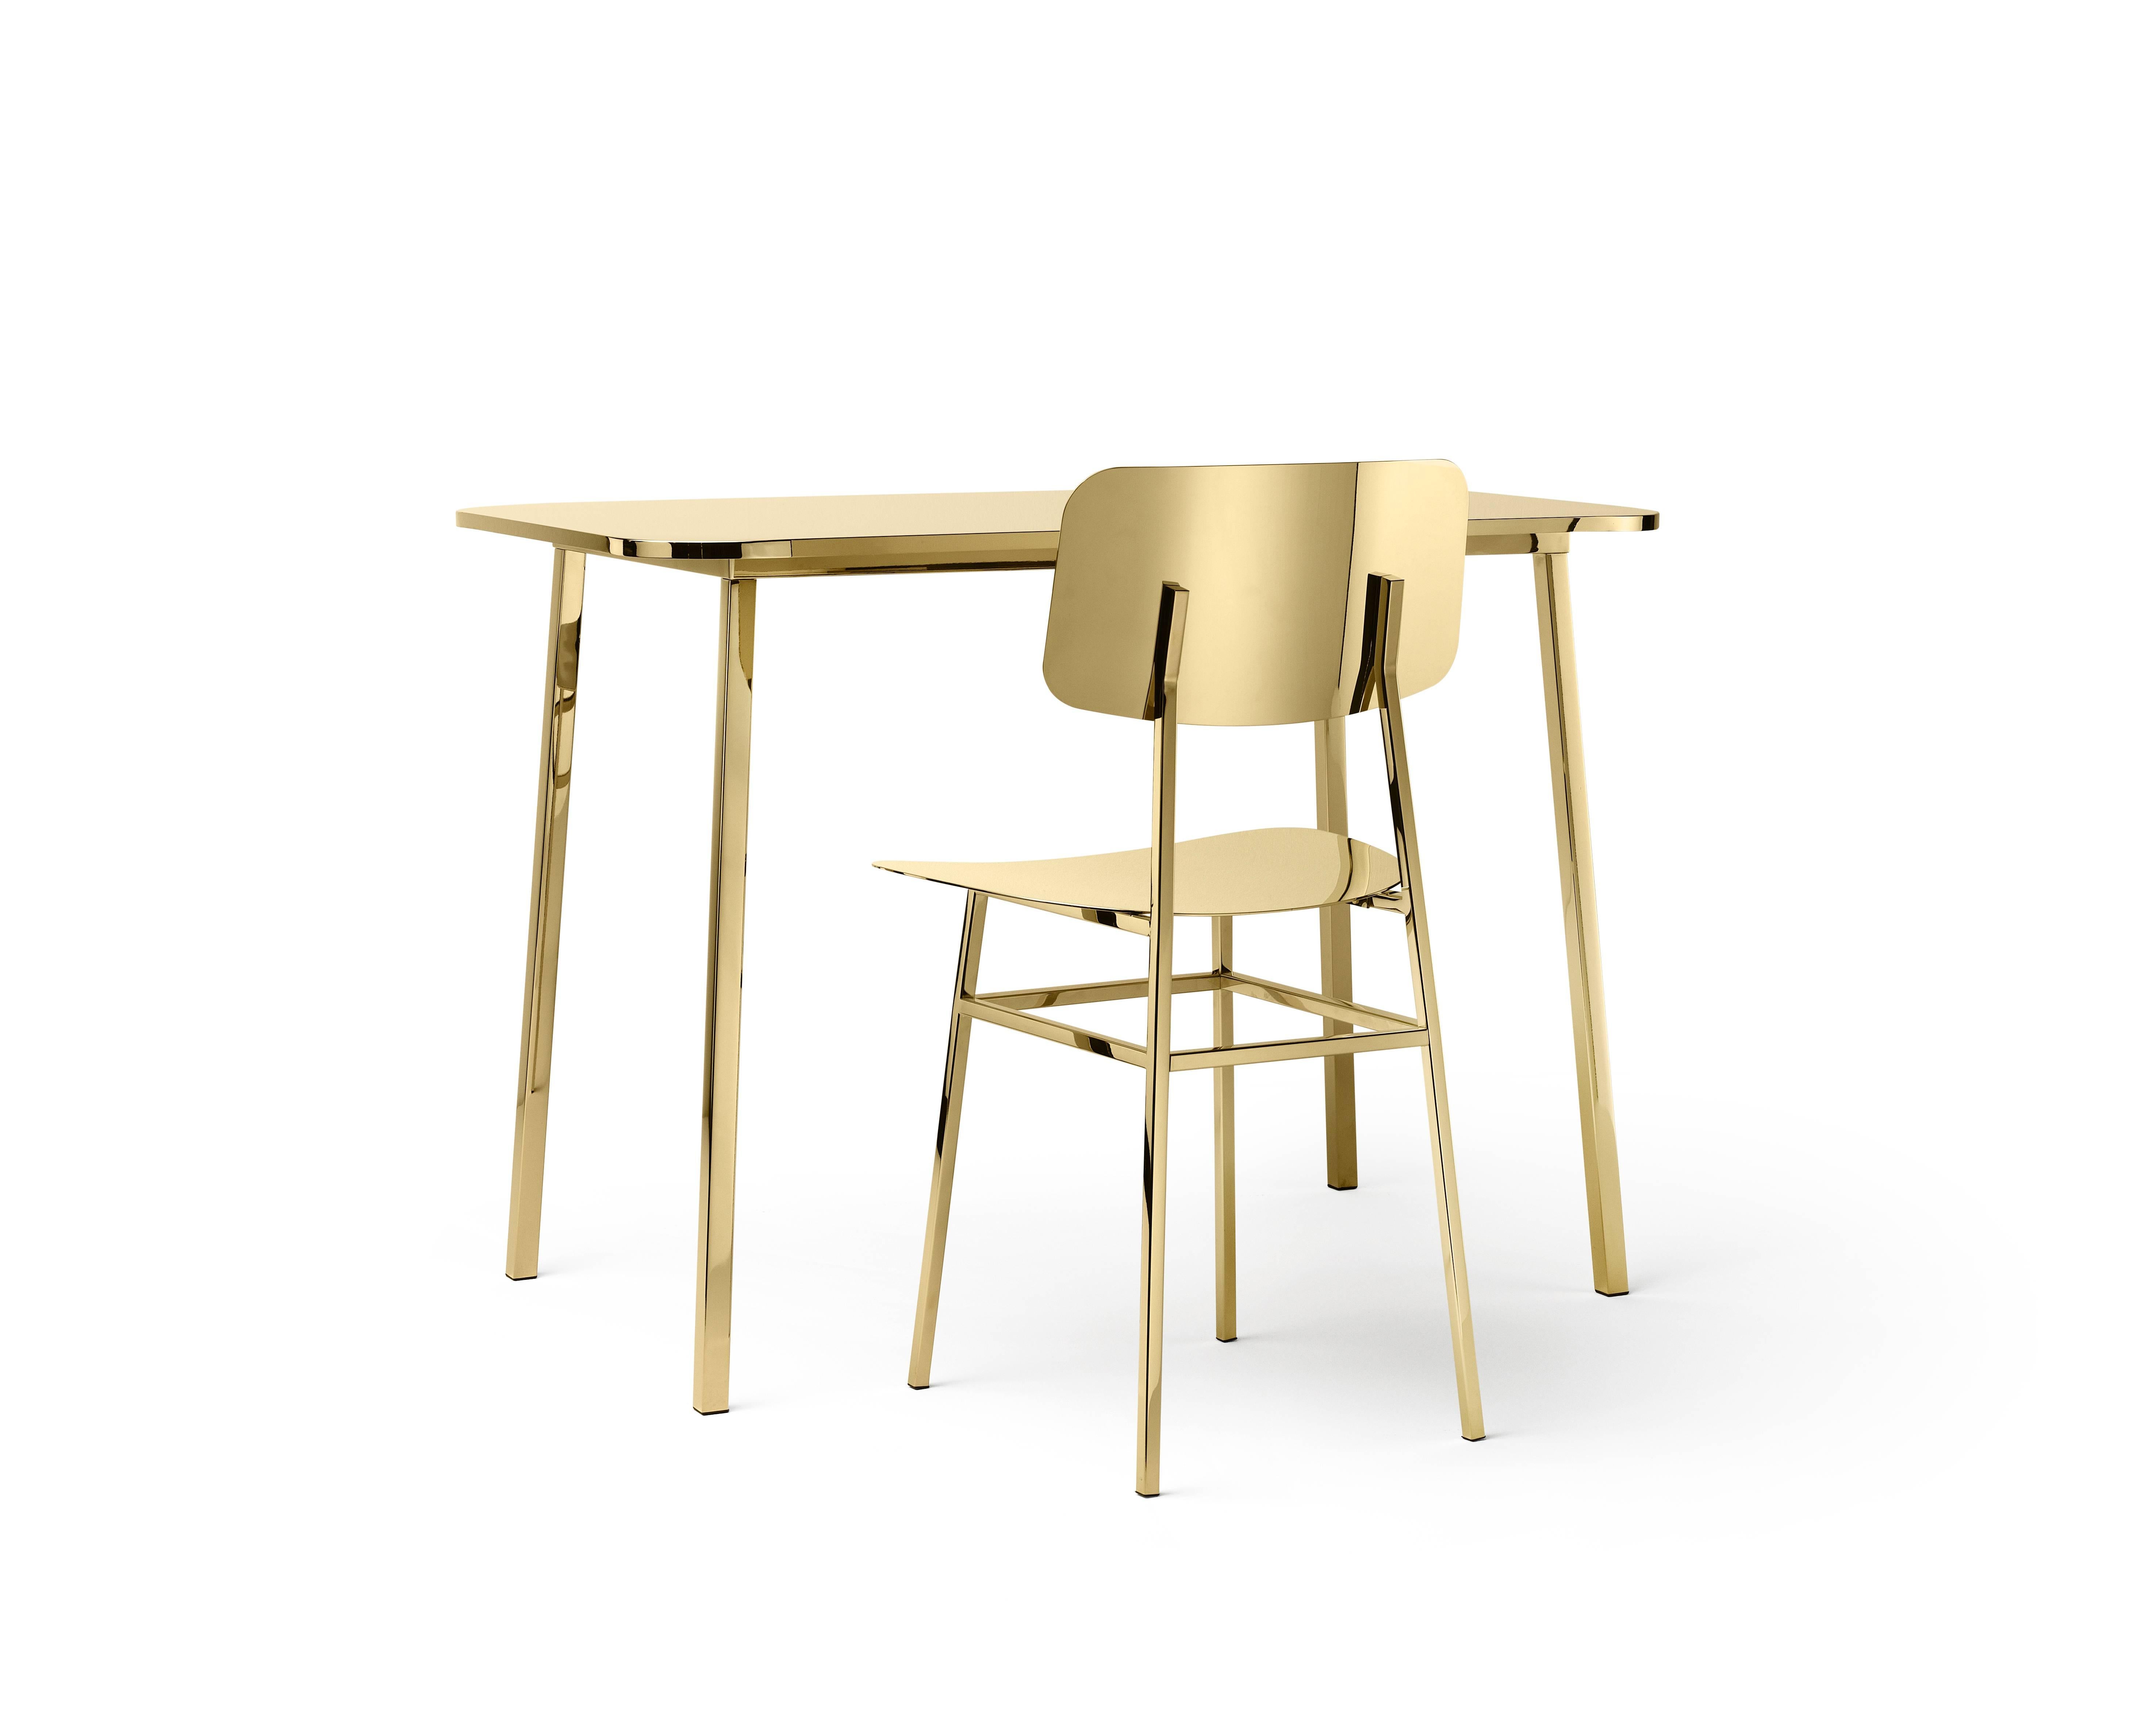 Italian Miami Chair Designed by Nika Zupanc for Ghidini, 1961 For Sale